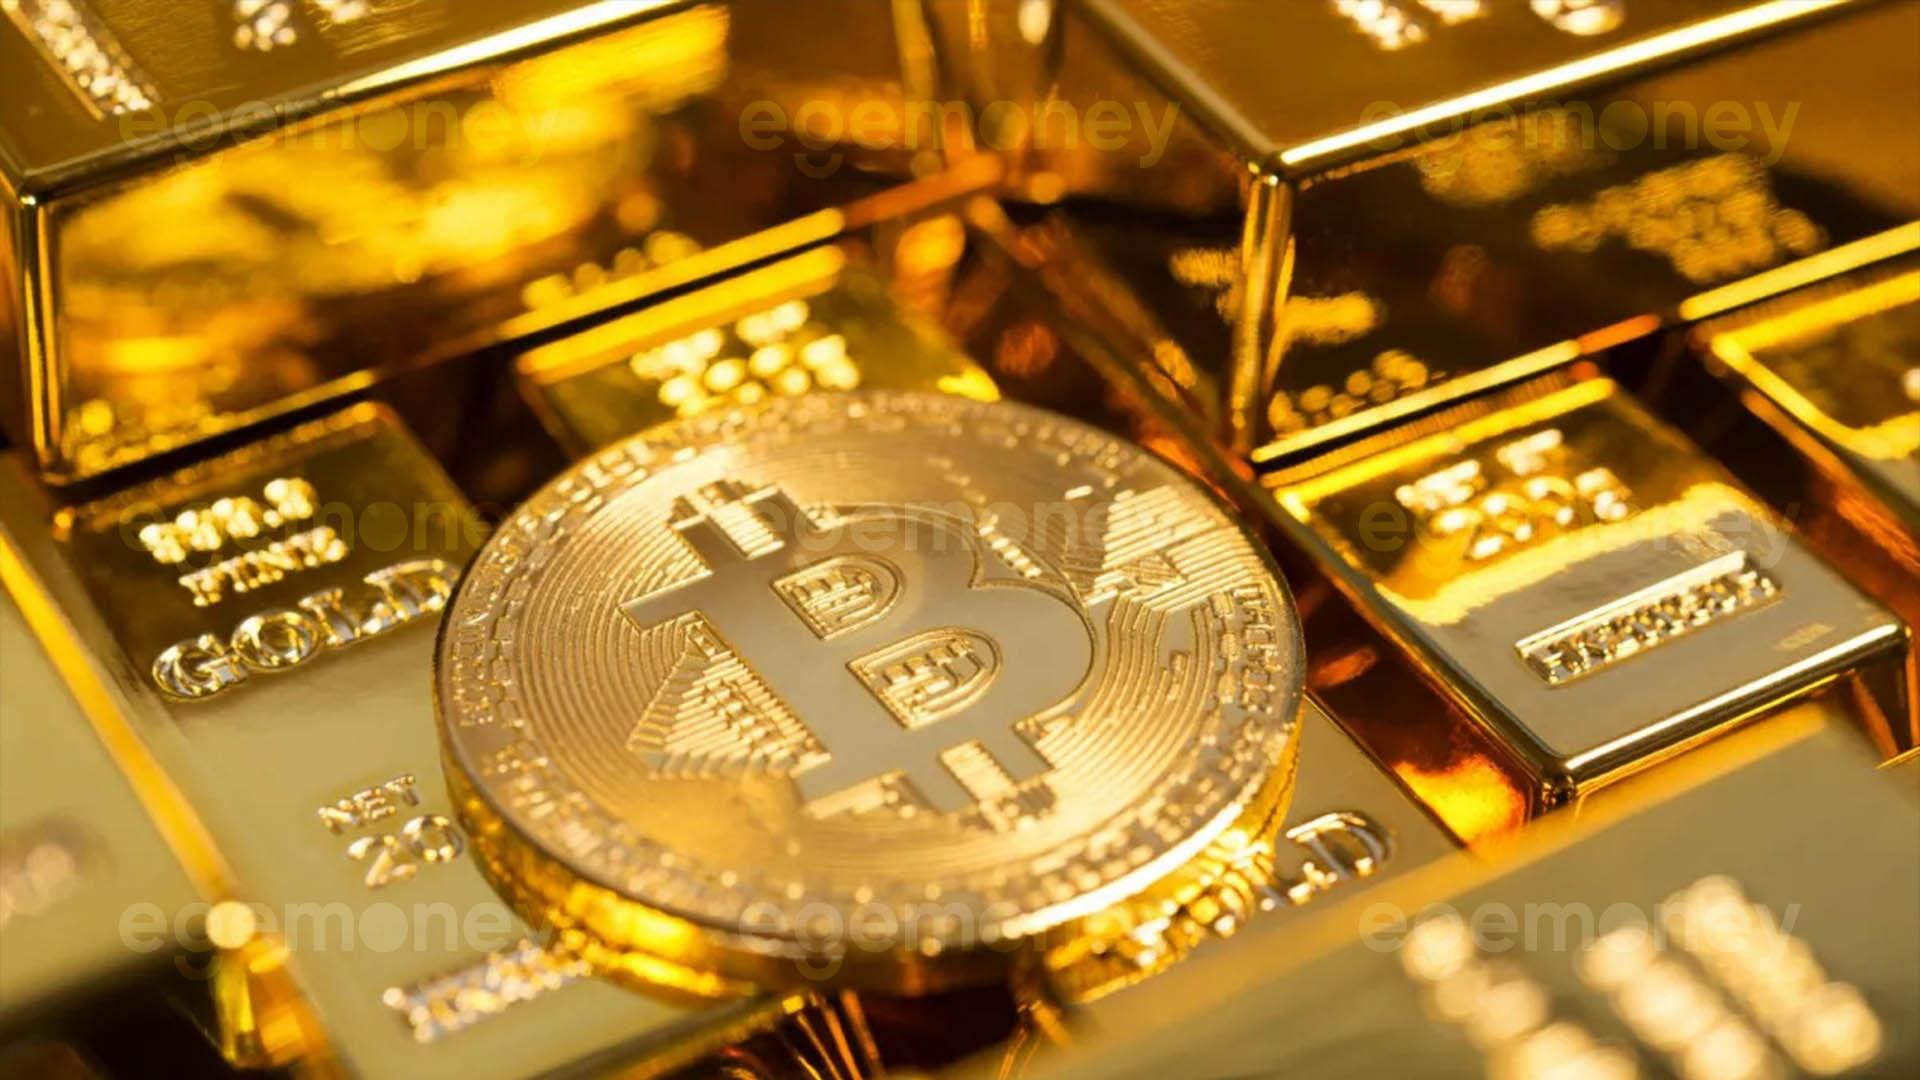 Matrixport states that Bitcoin is better than Digital Gold